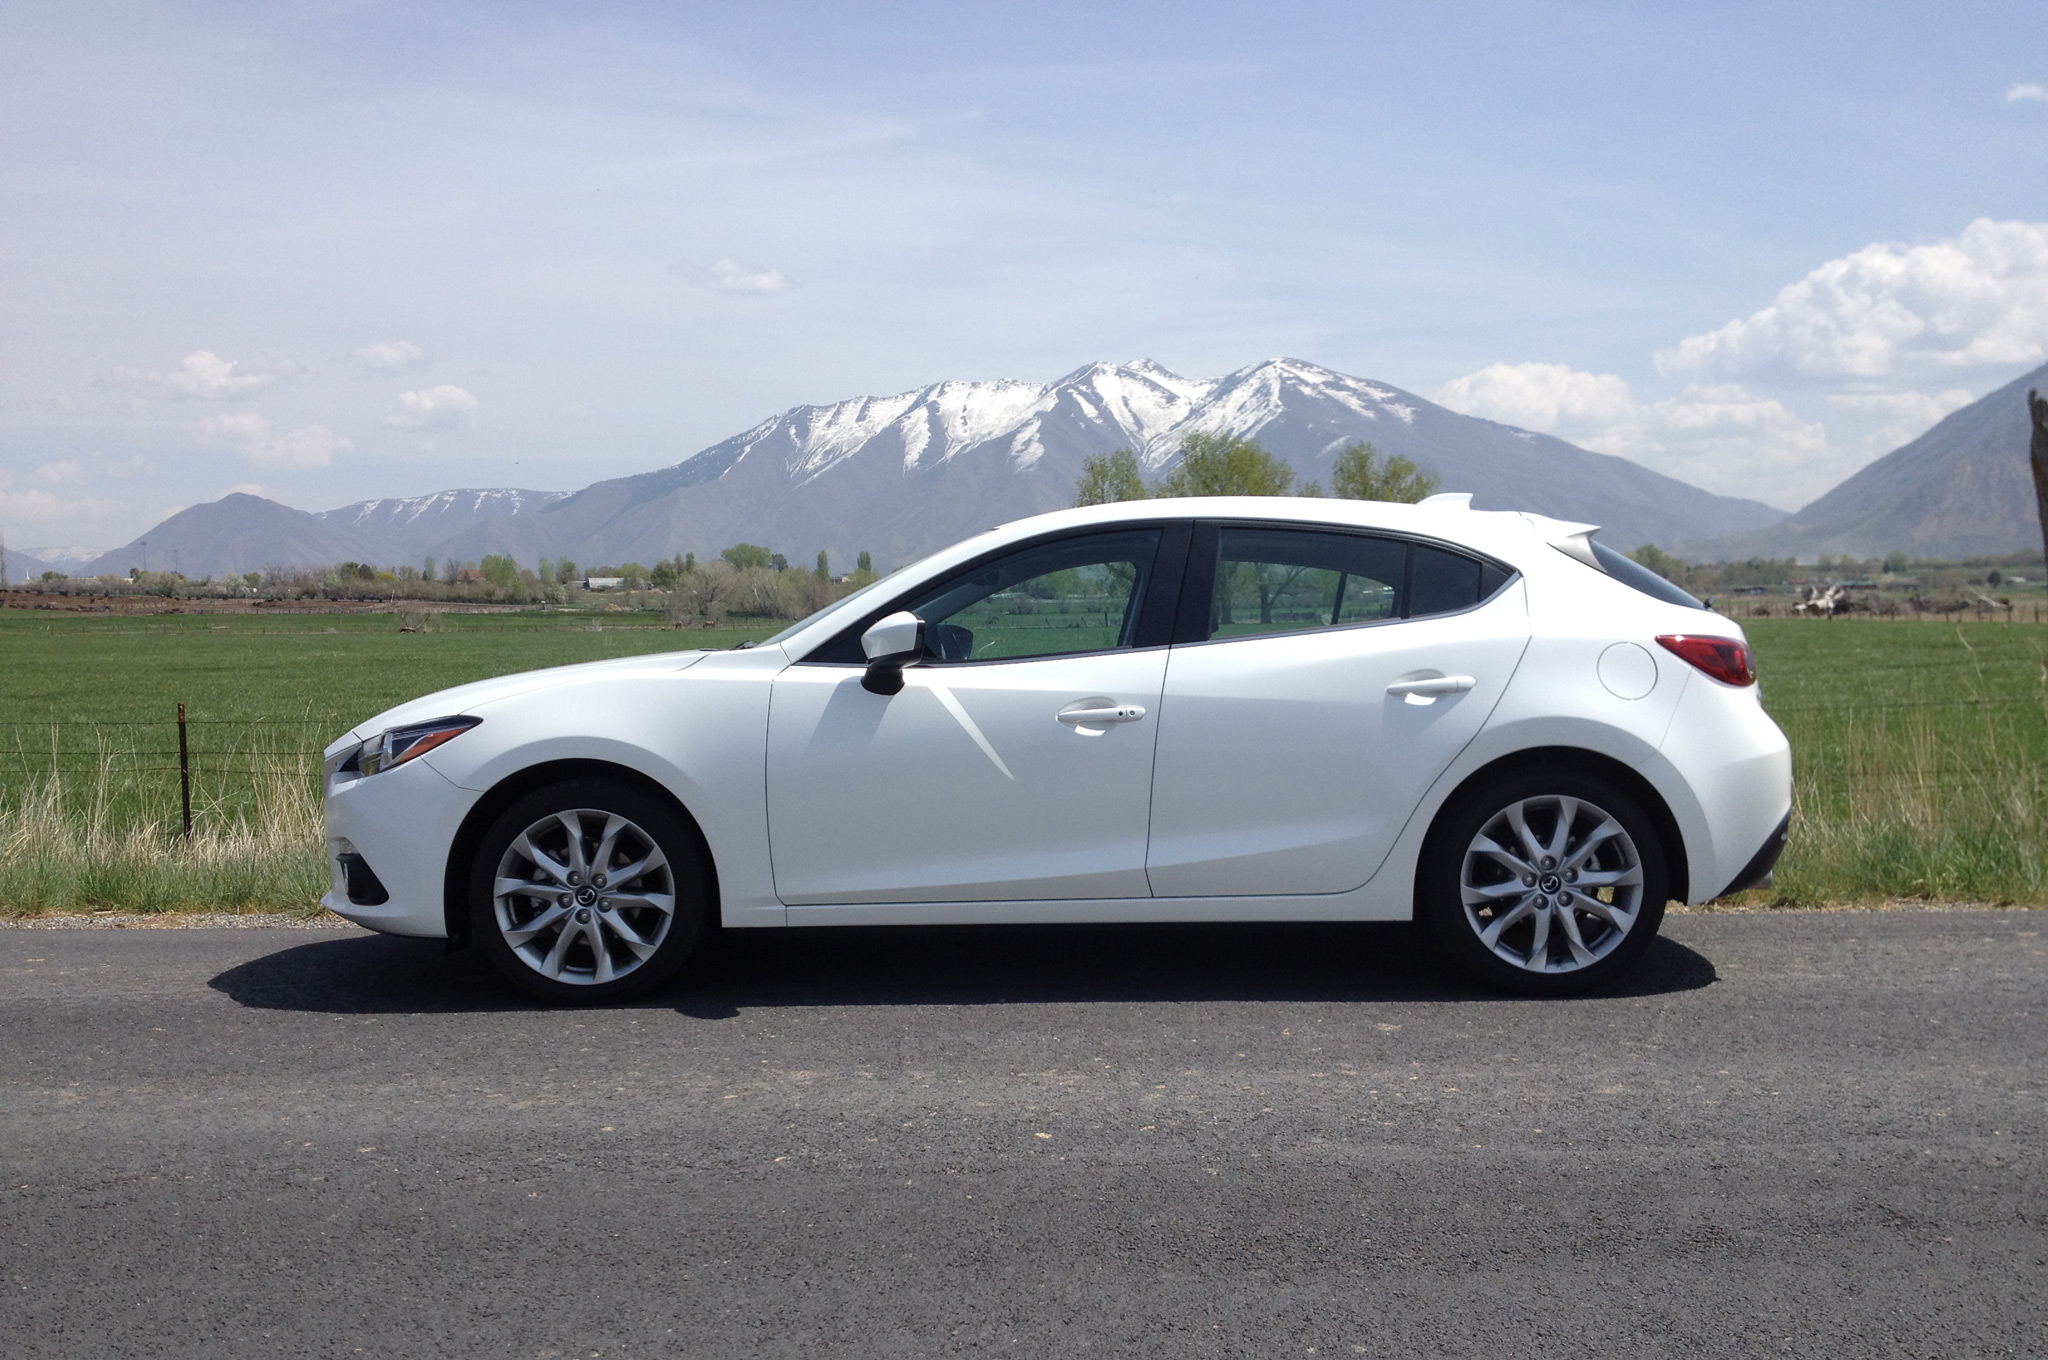 2014-Mazda3-s-Grand-Touring-hatchback-side-profile-in-the-Rocky-Mountains1.jpg